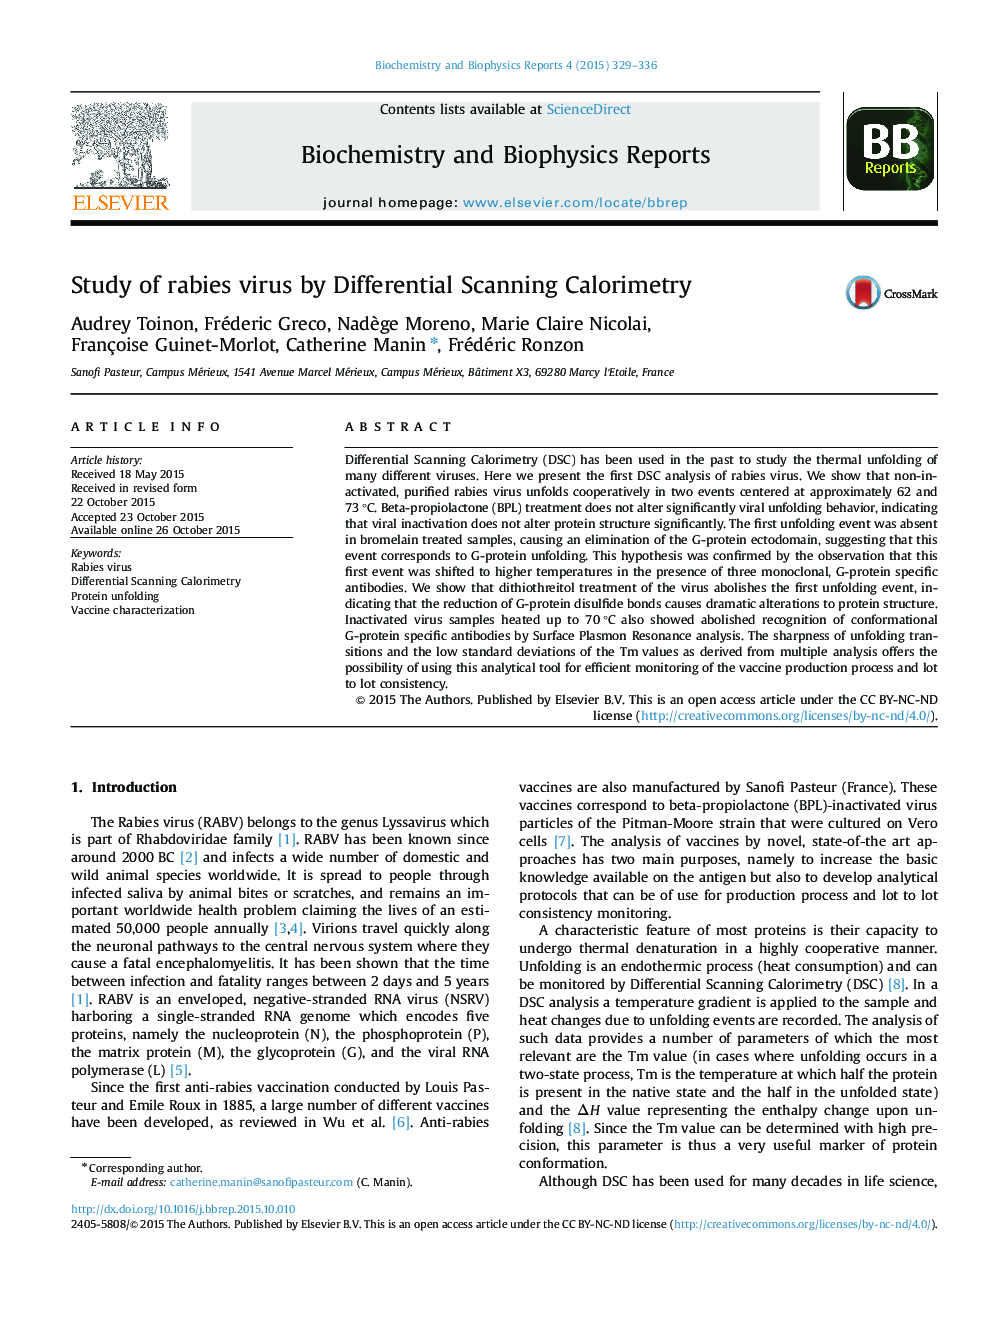 Study of rabies virus by Differential Scanning Calorimetry